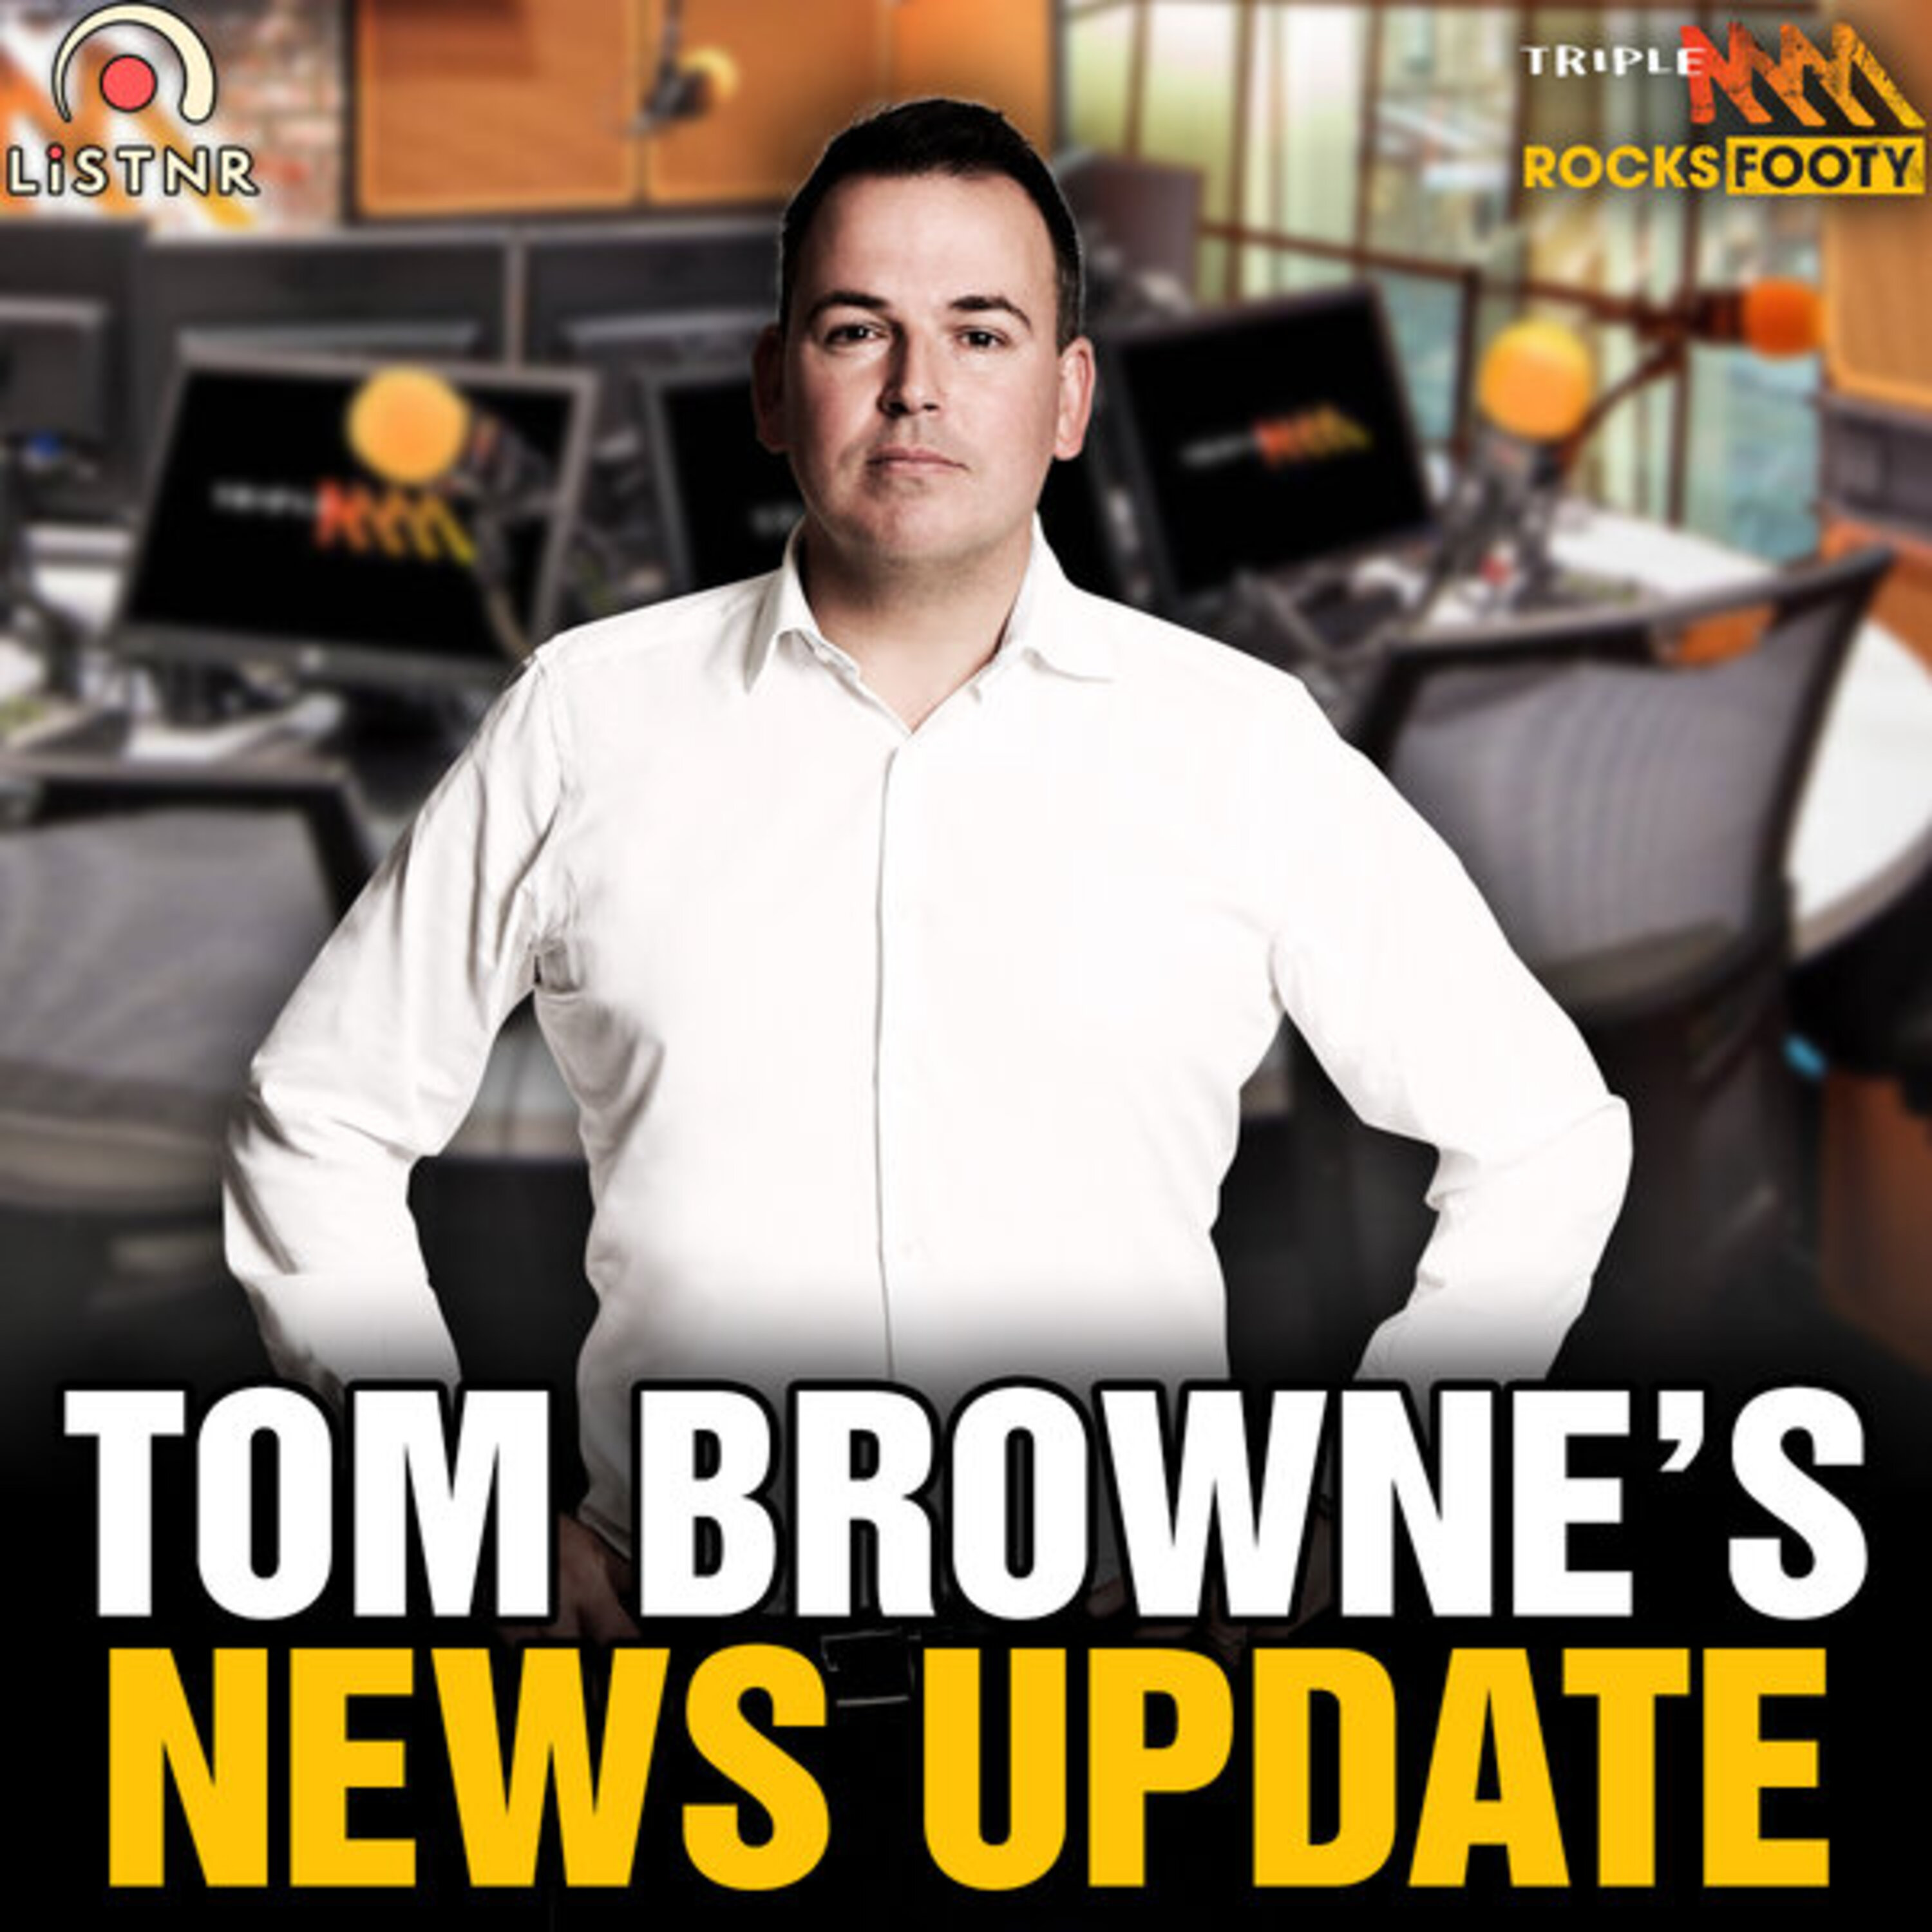 Tom Browne's News | Petracca's Leg Fracture, Richmond with Taranto & Hopper, TV Deal Imminent